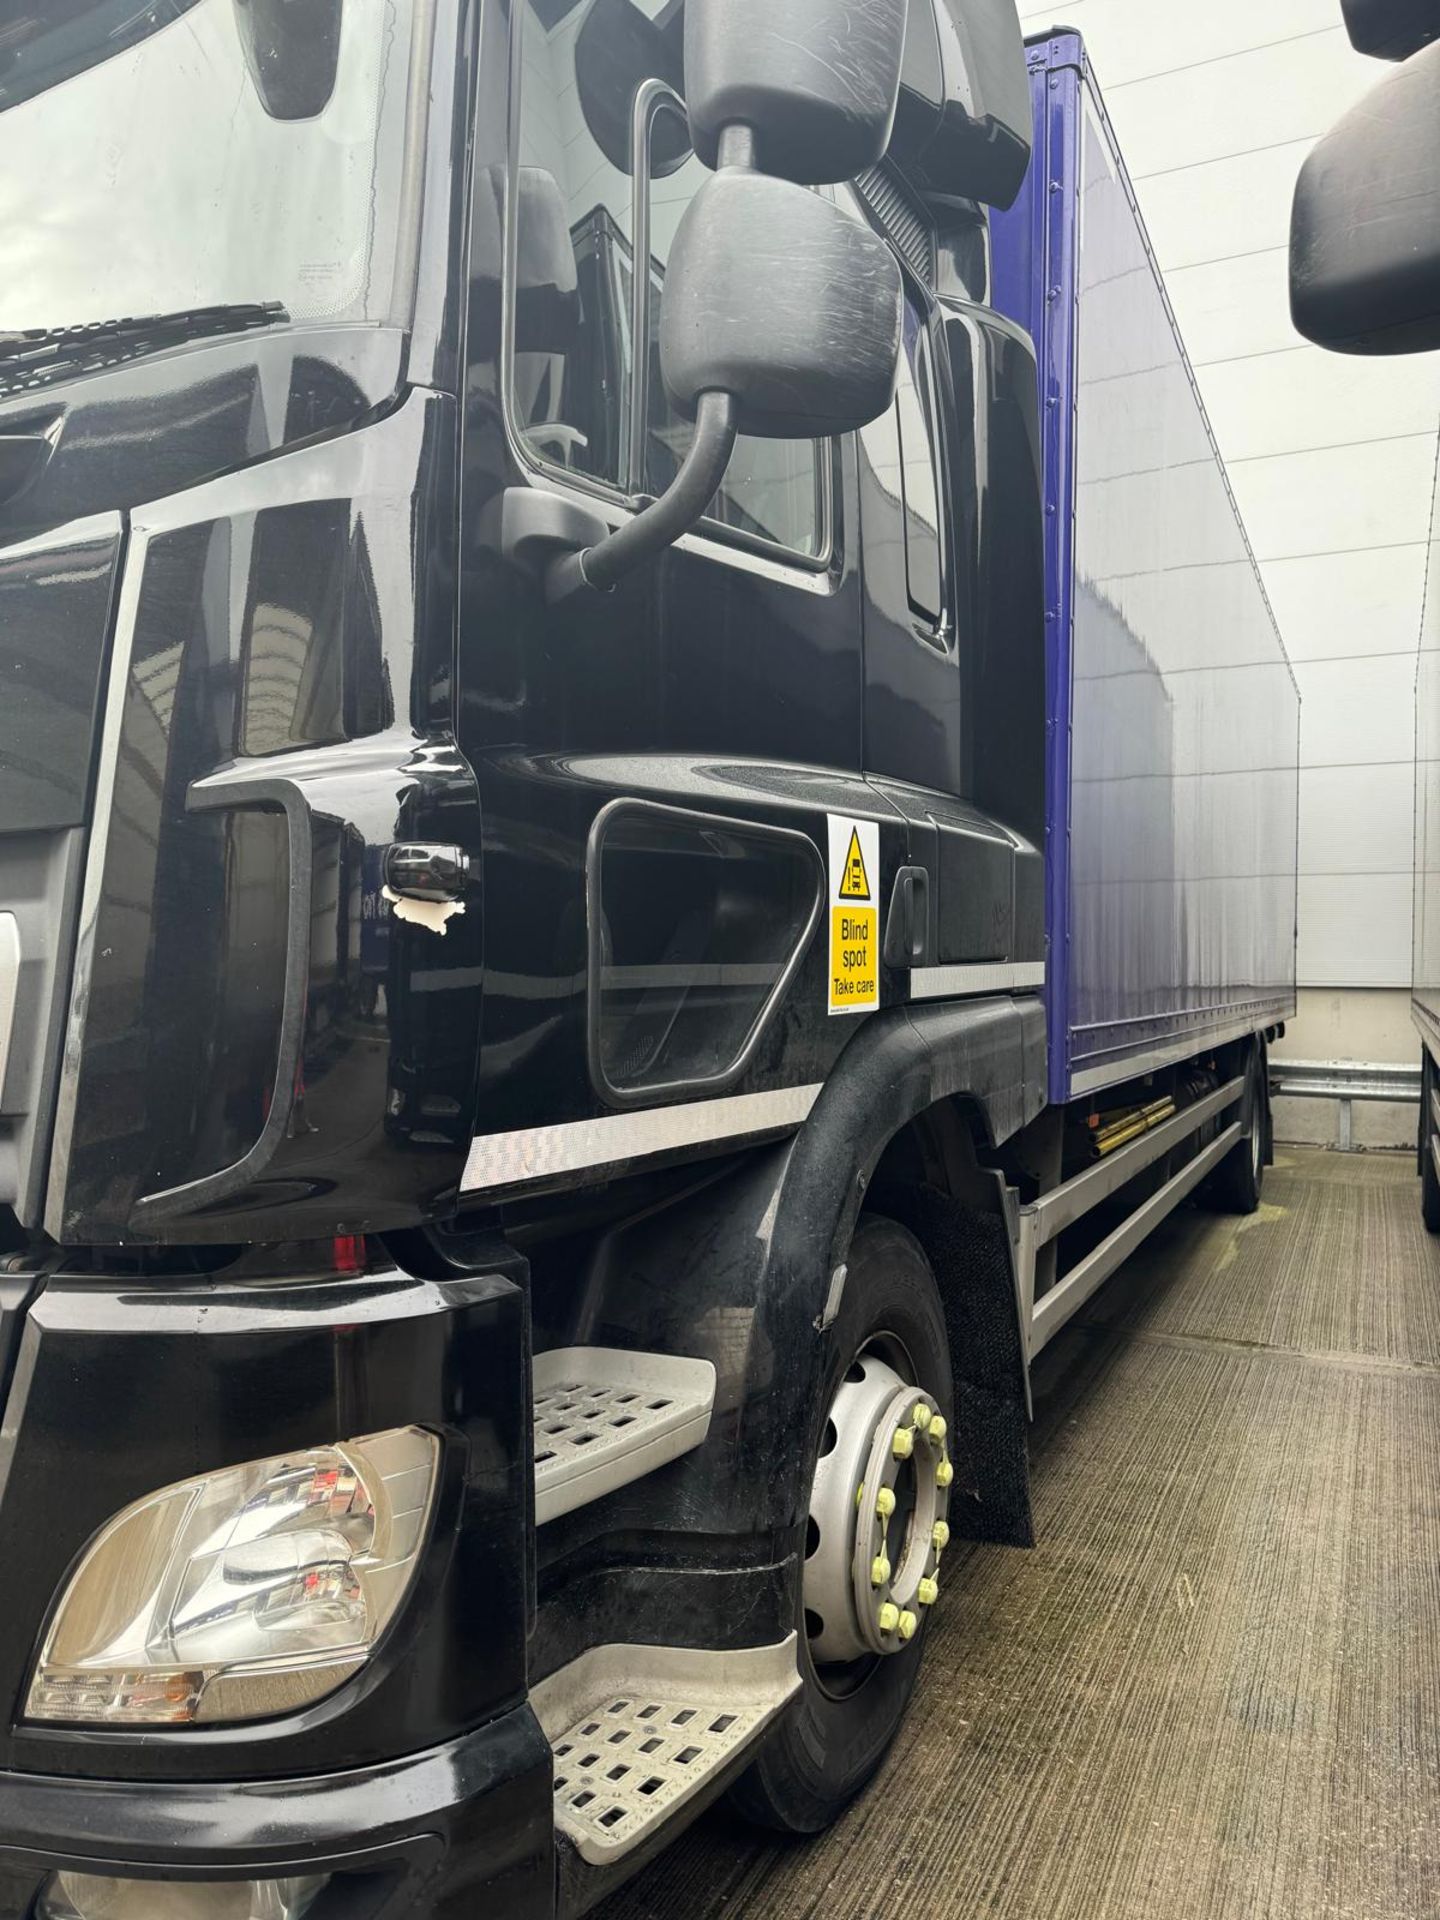 2019, DAF CF 260 - FN69 AXG (18 Ton Rigid Truck with Tail Lift) - Image 6 of 16